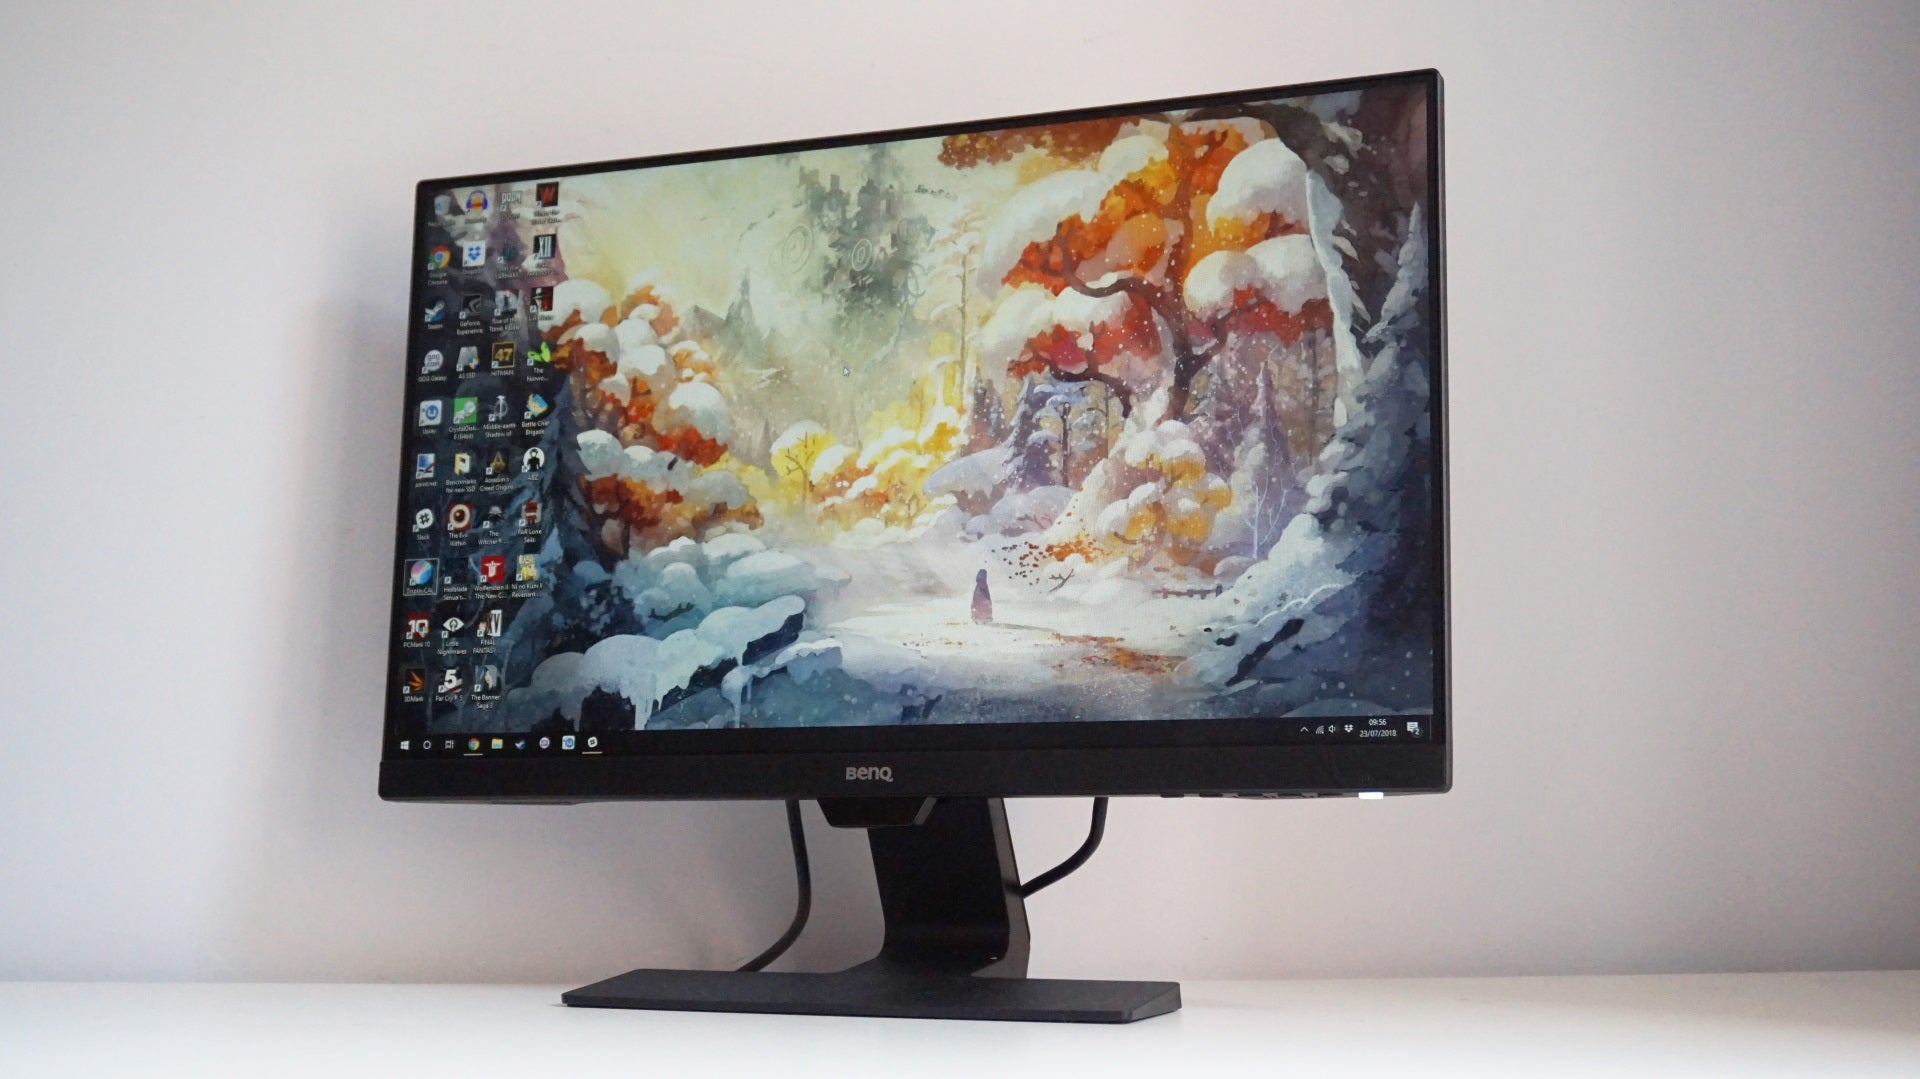 BenQ HT2050A Review: Great (Big) Picture for the Money - CNET